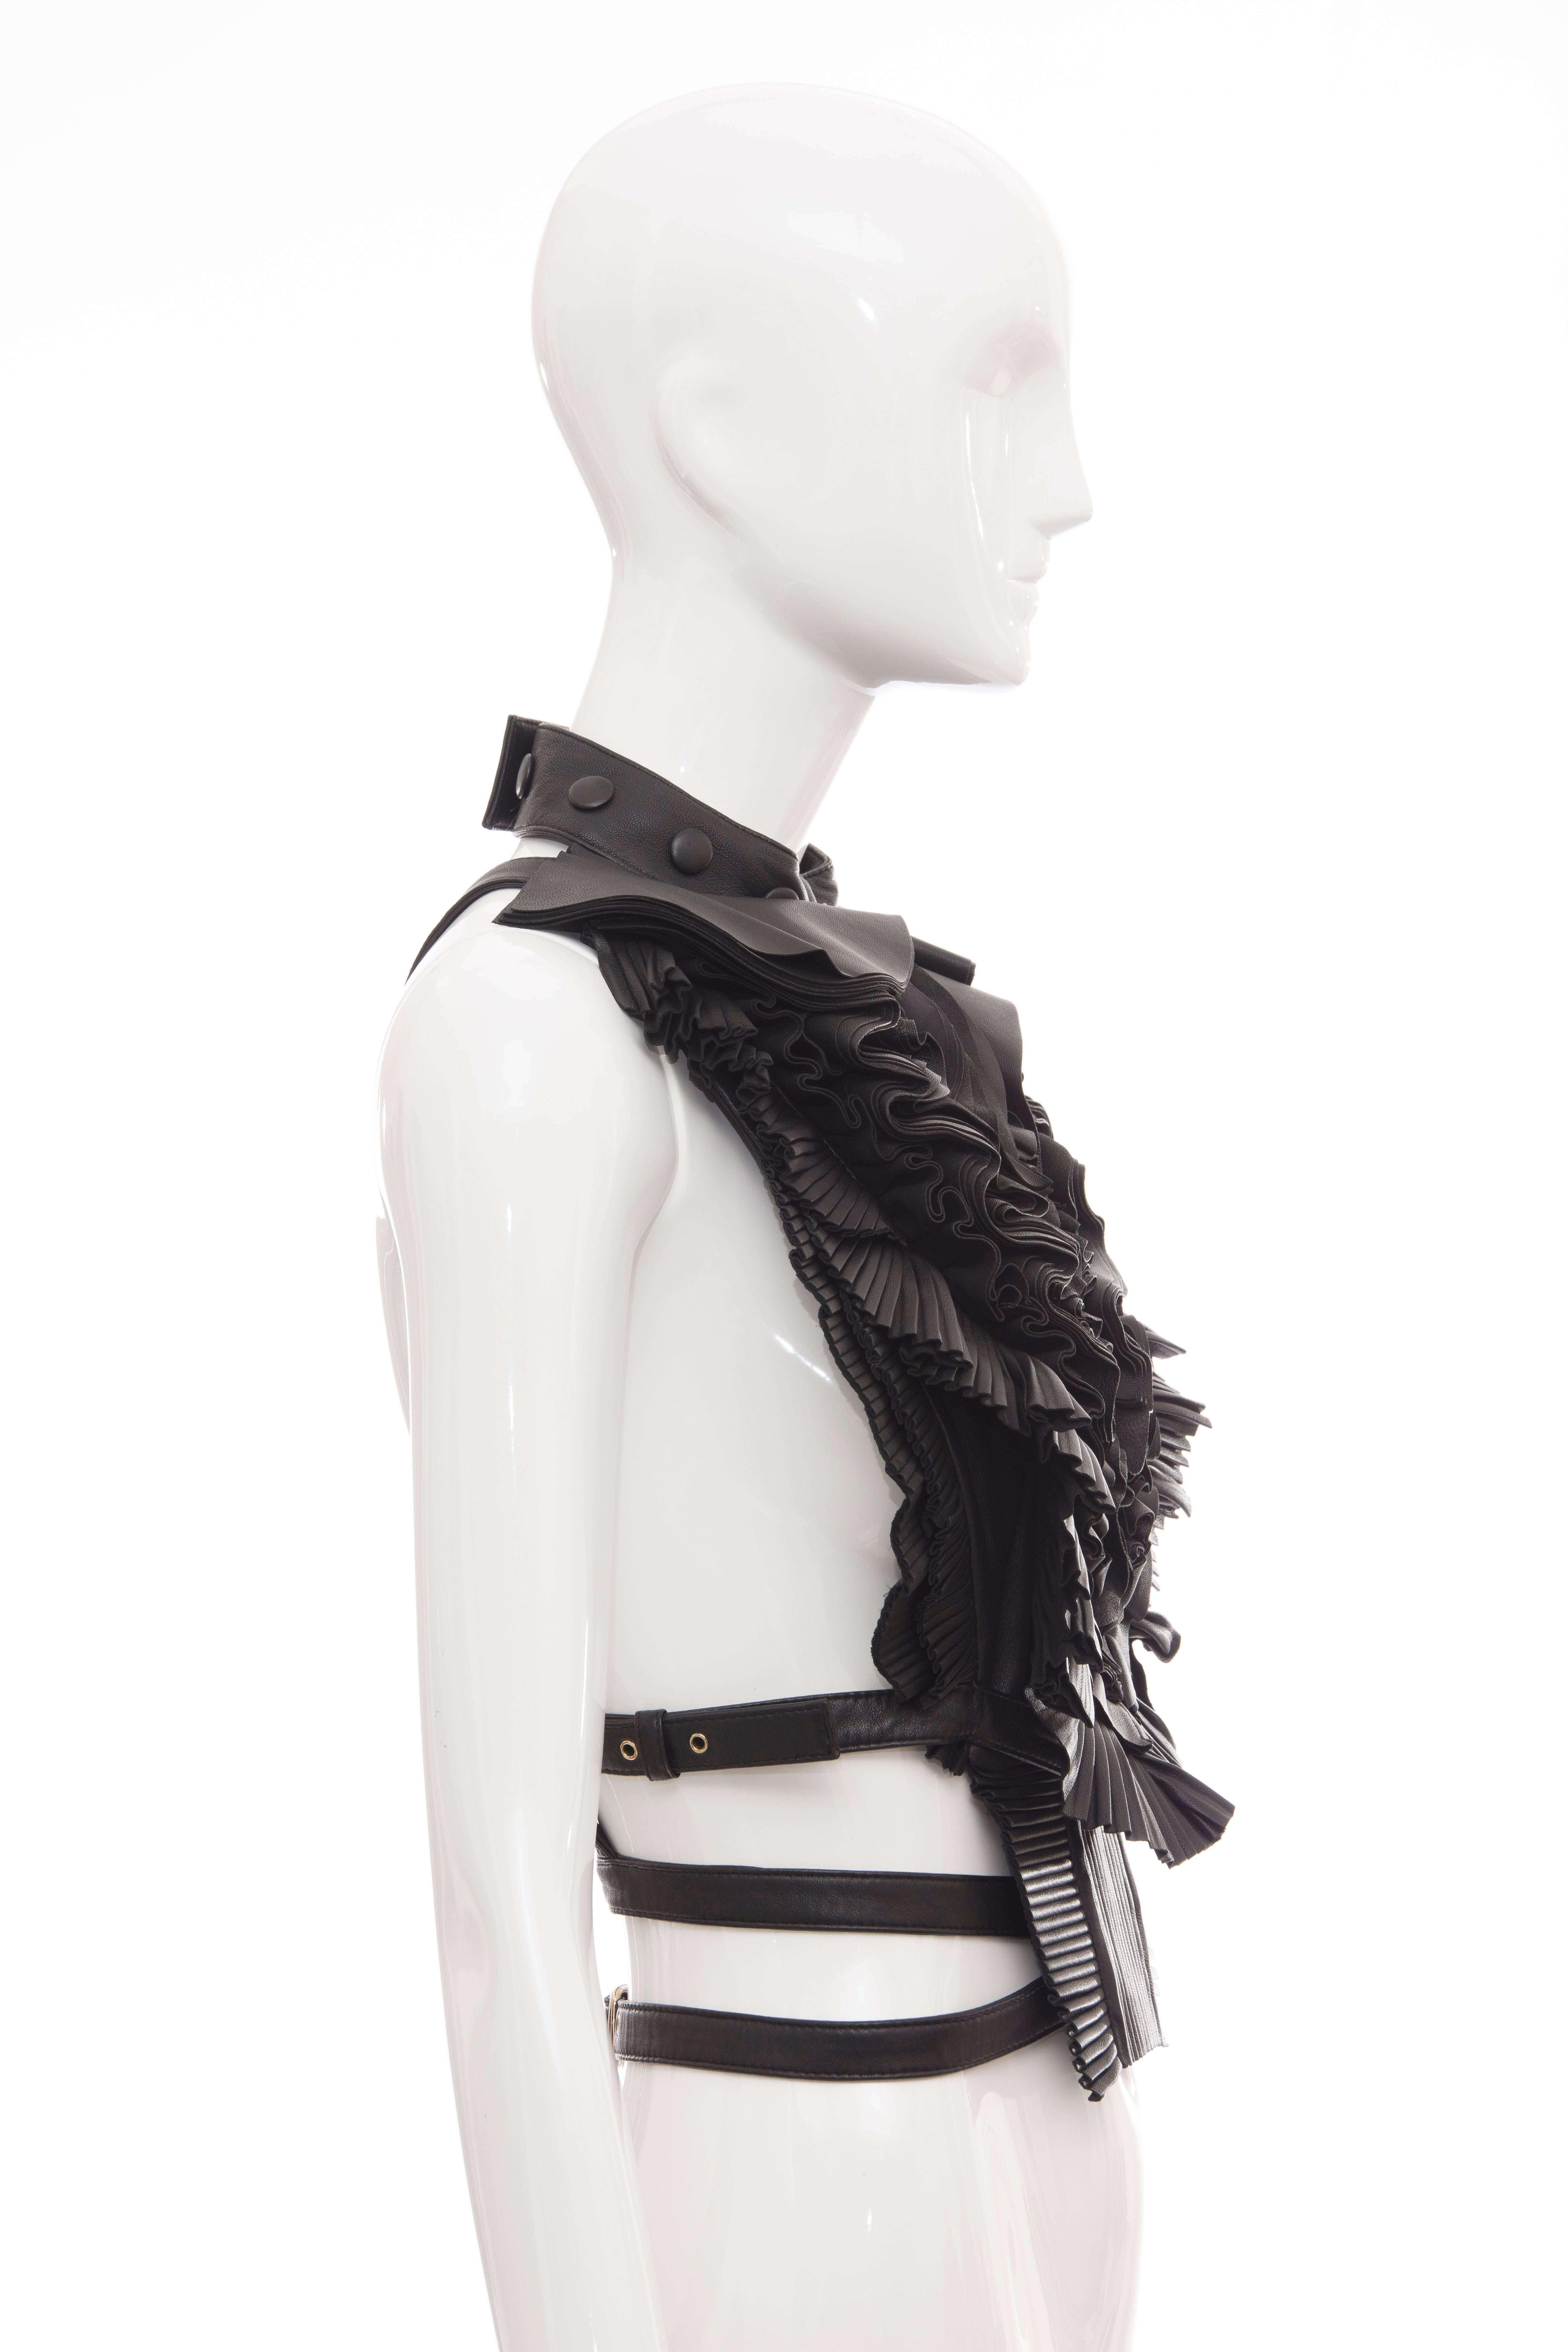 Givenchy by Riccardo Tisci Runway Black Leather Ruffled Harness Top, Spring 2011 3